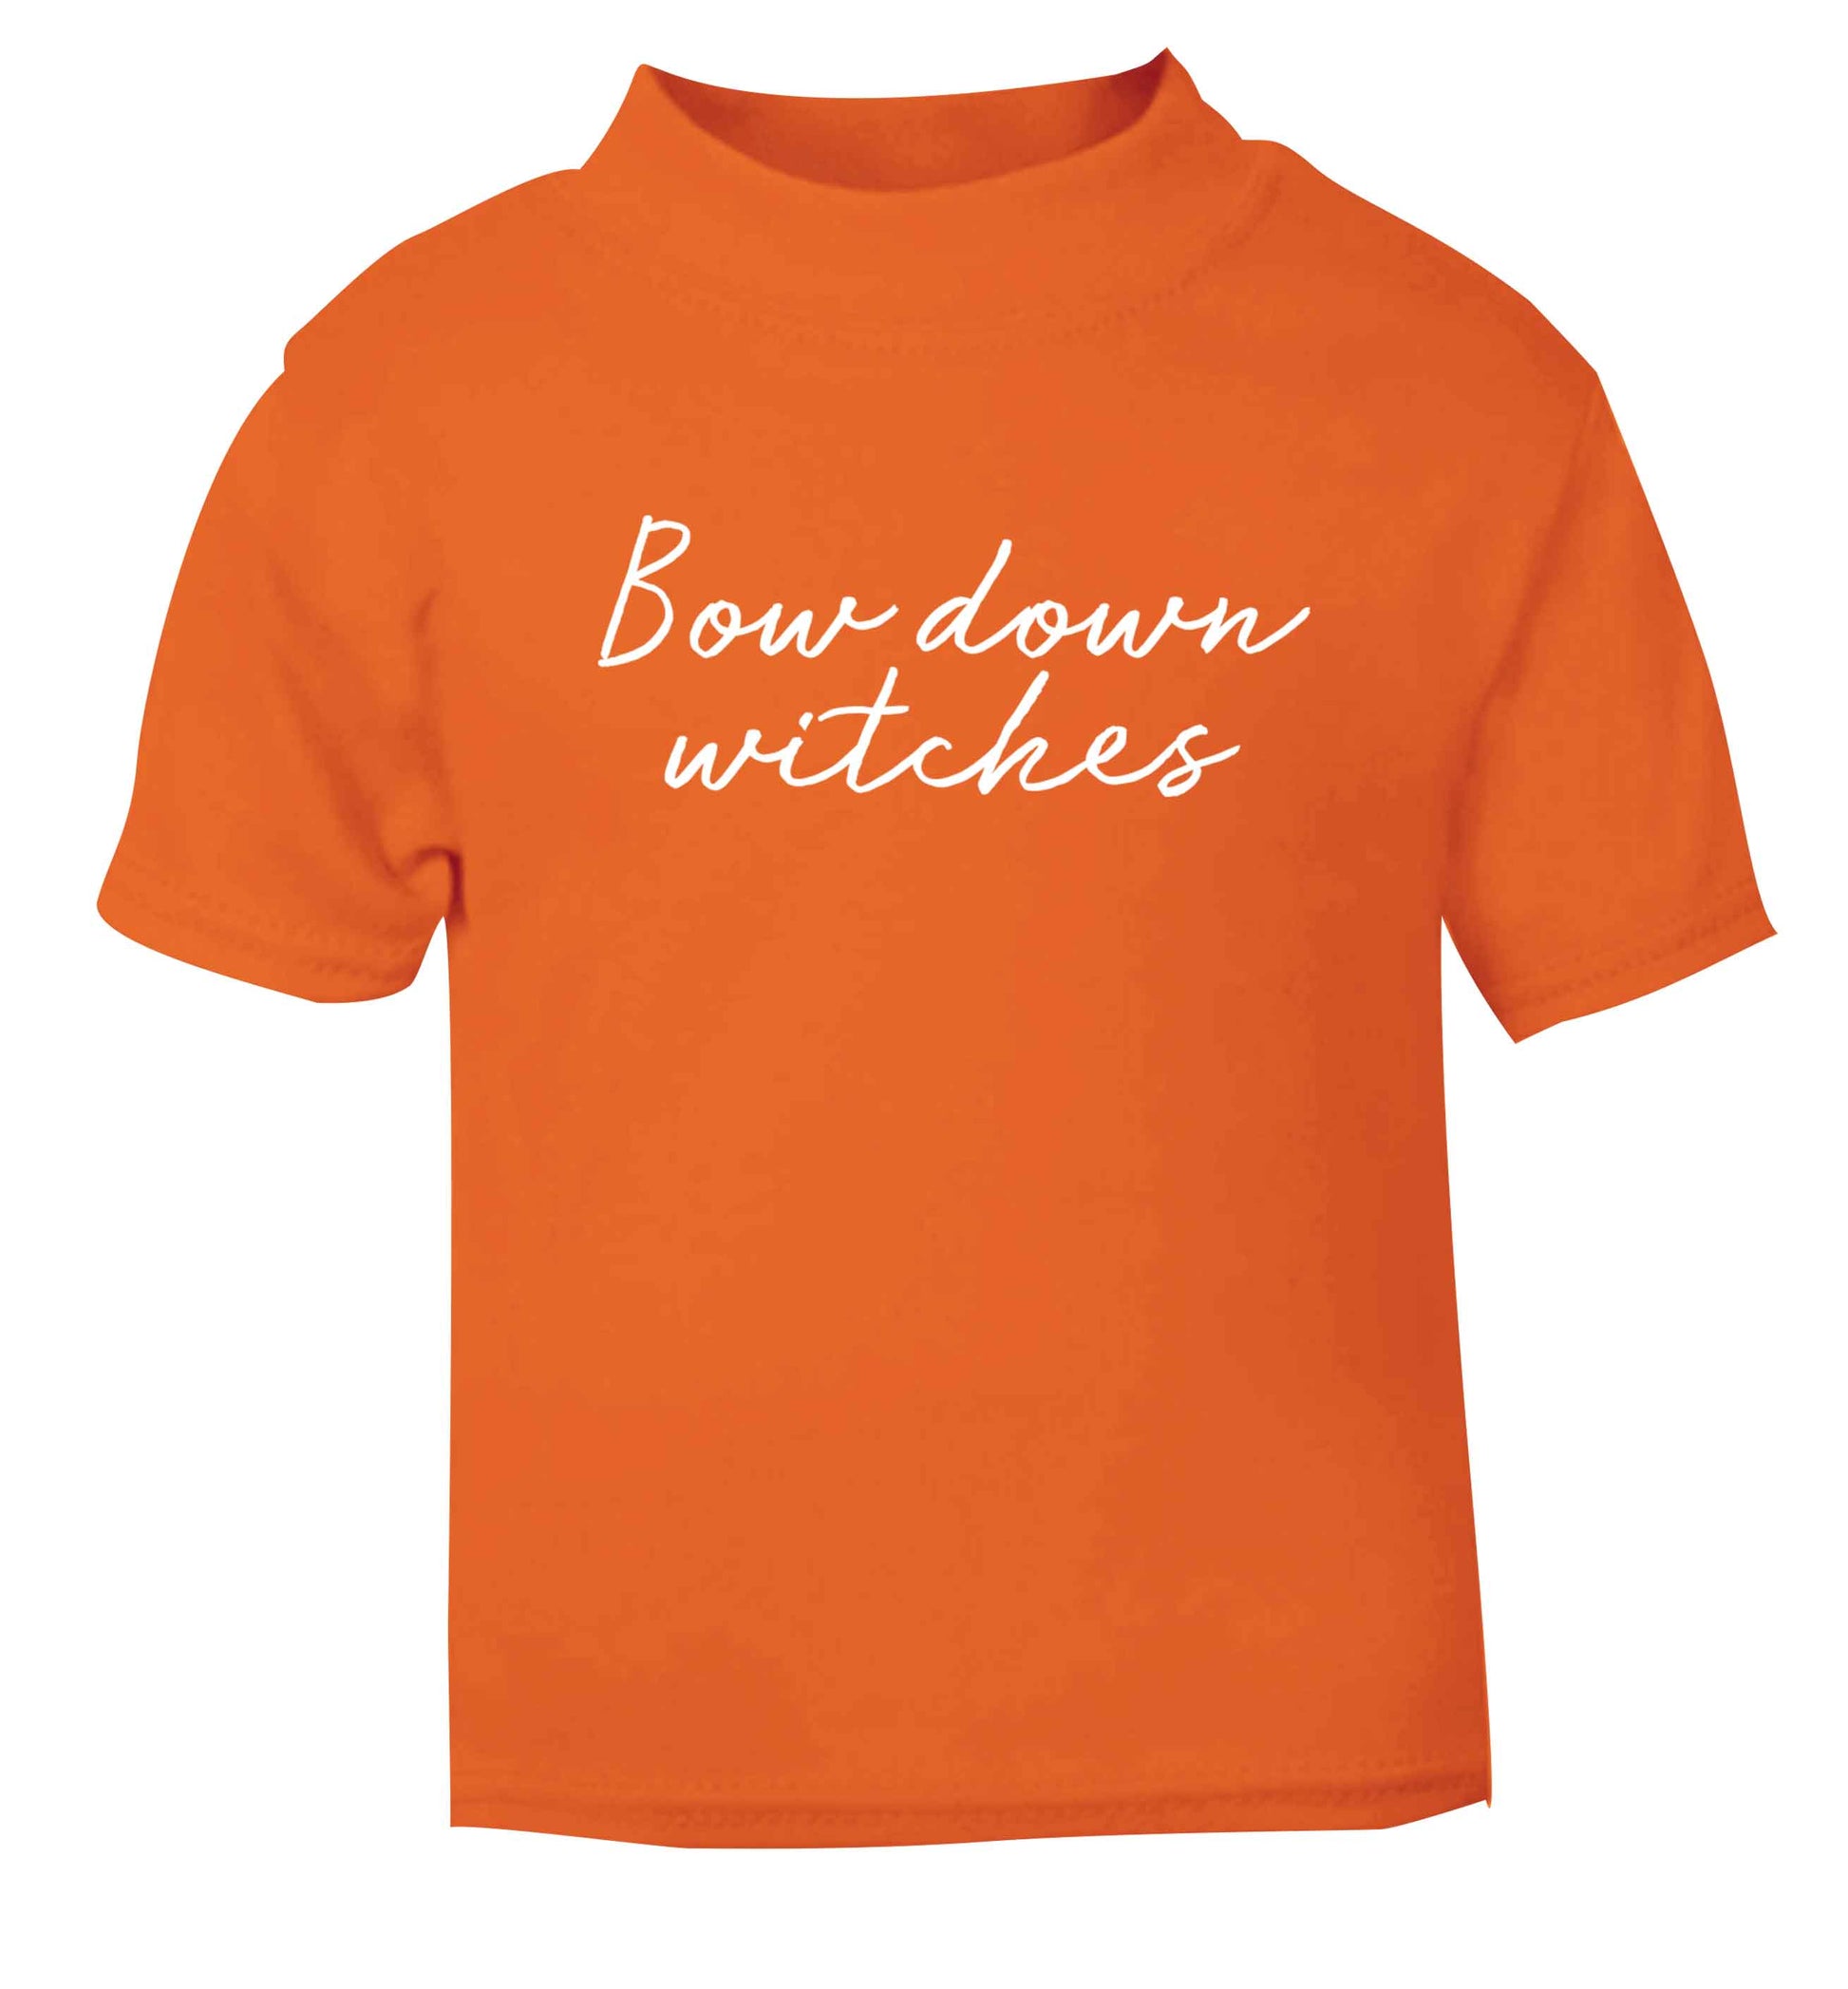 Bow down witches orange baby toddler Tshirt 2 Years